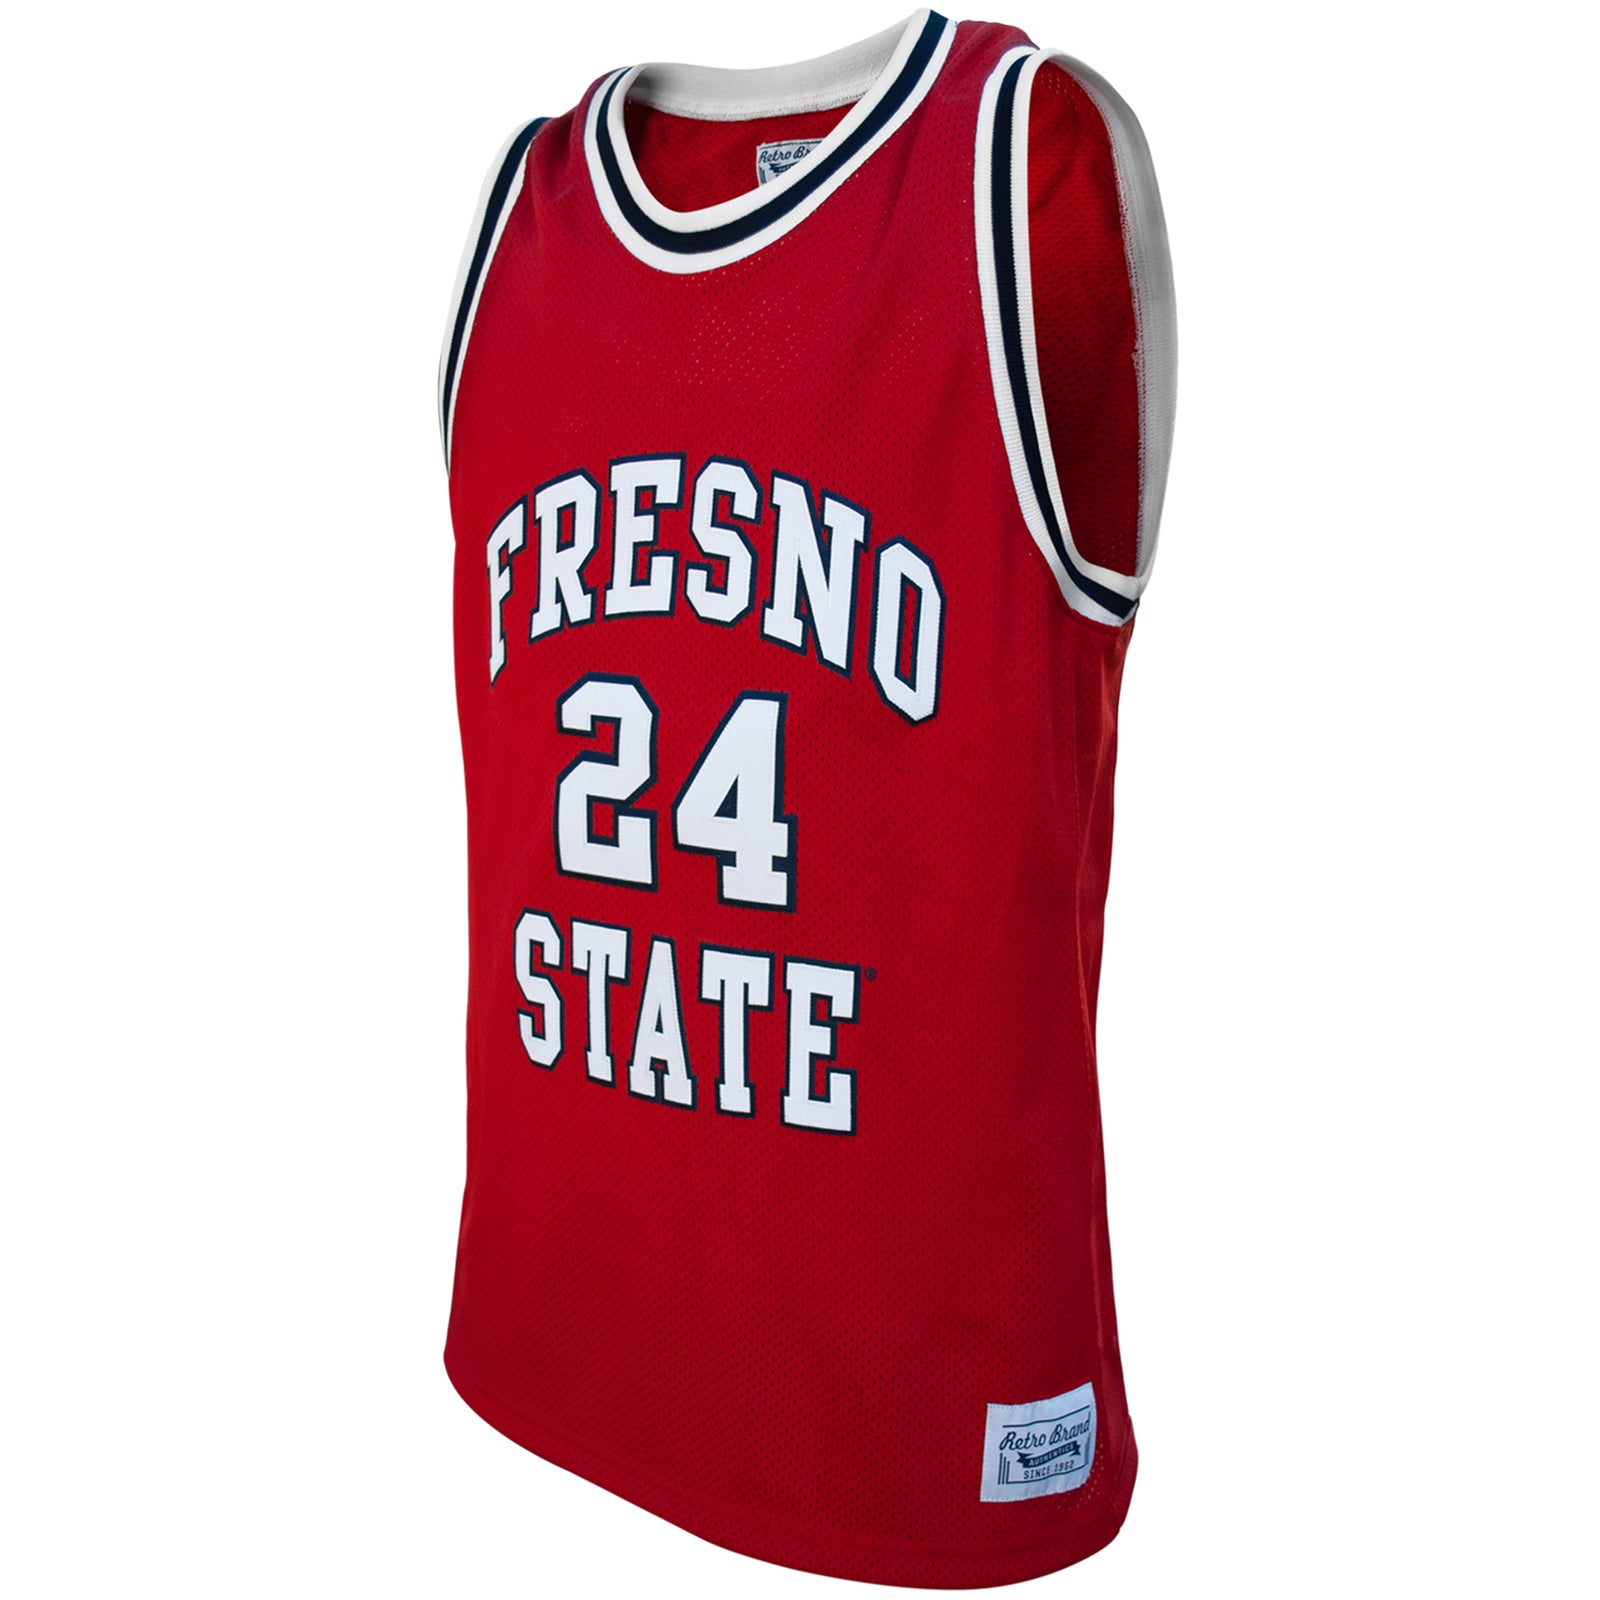 Fresno State Paul George Throwback Jersey